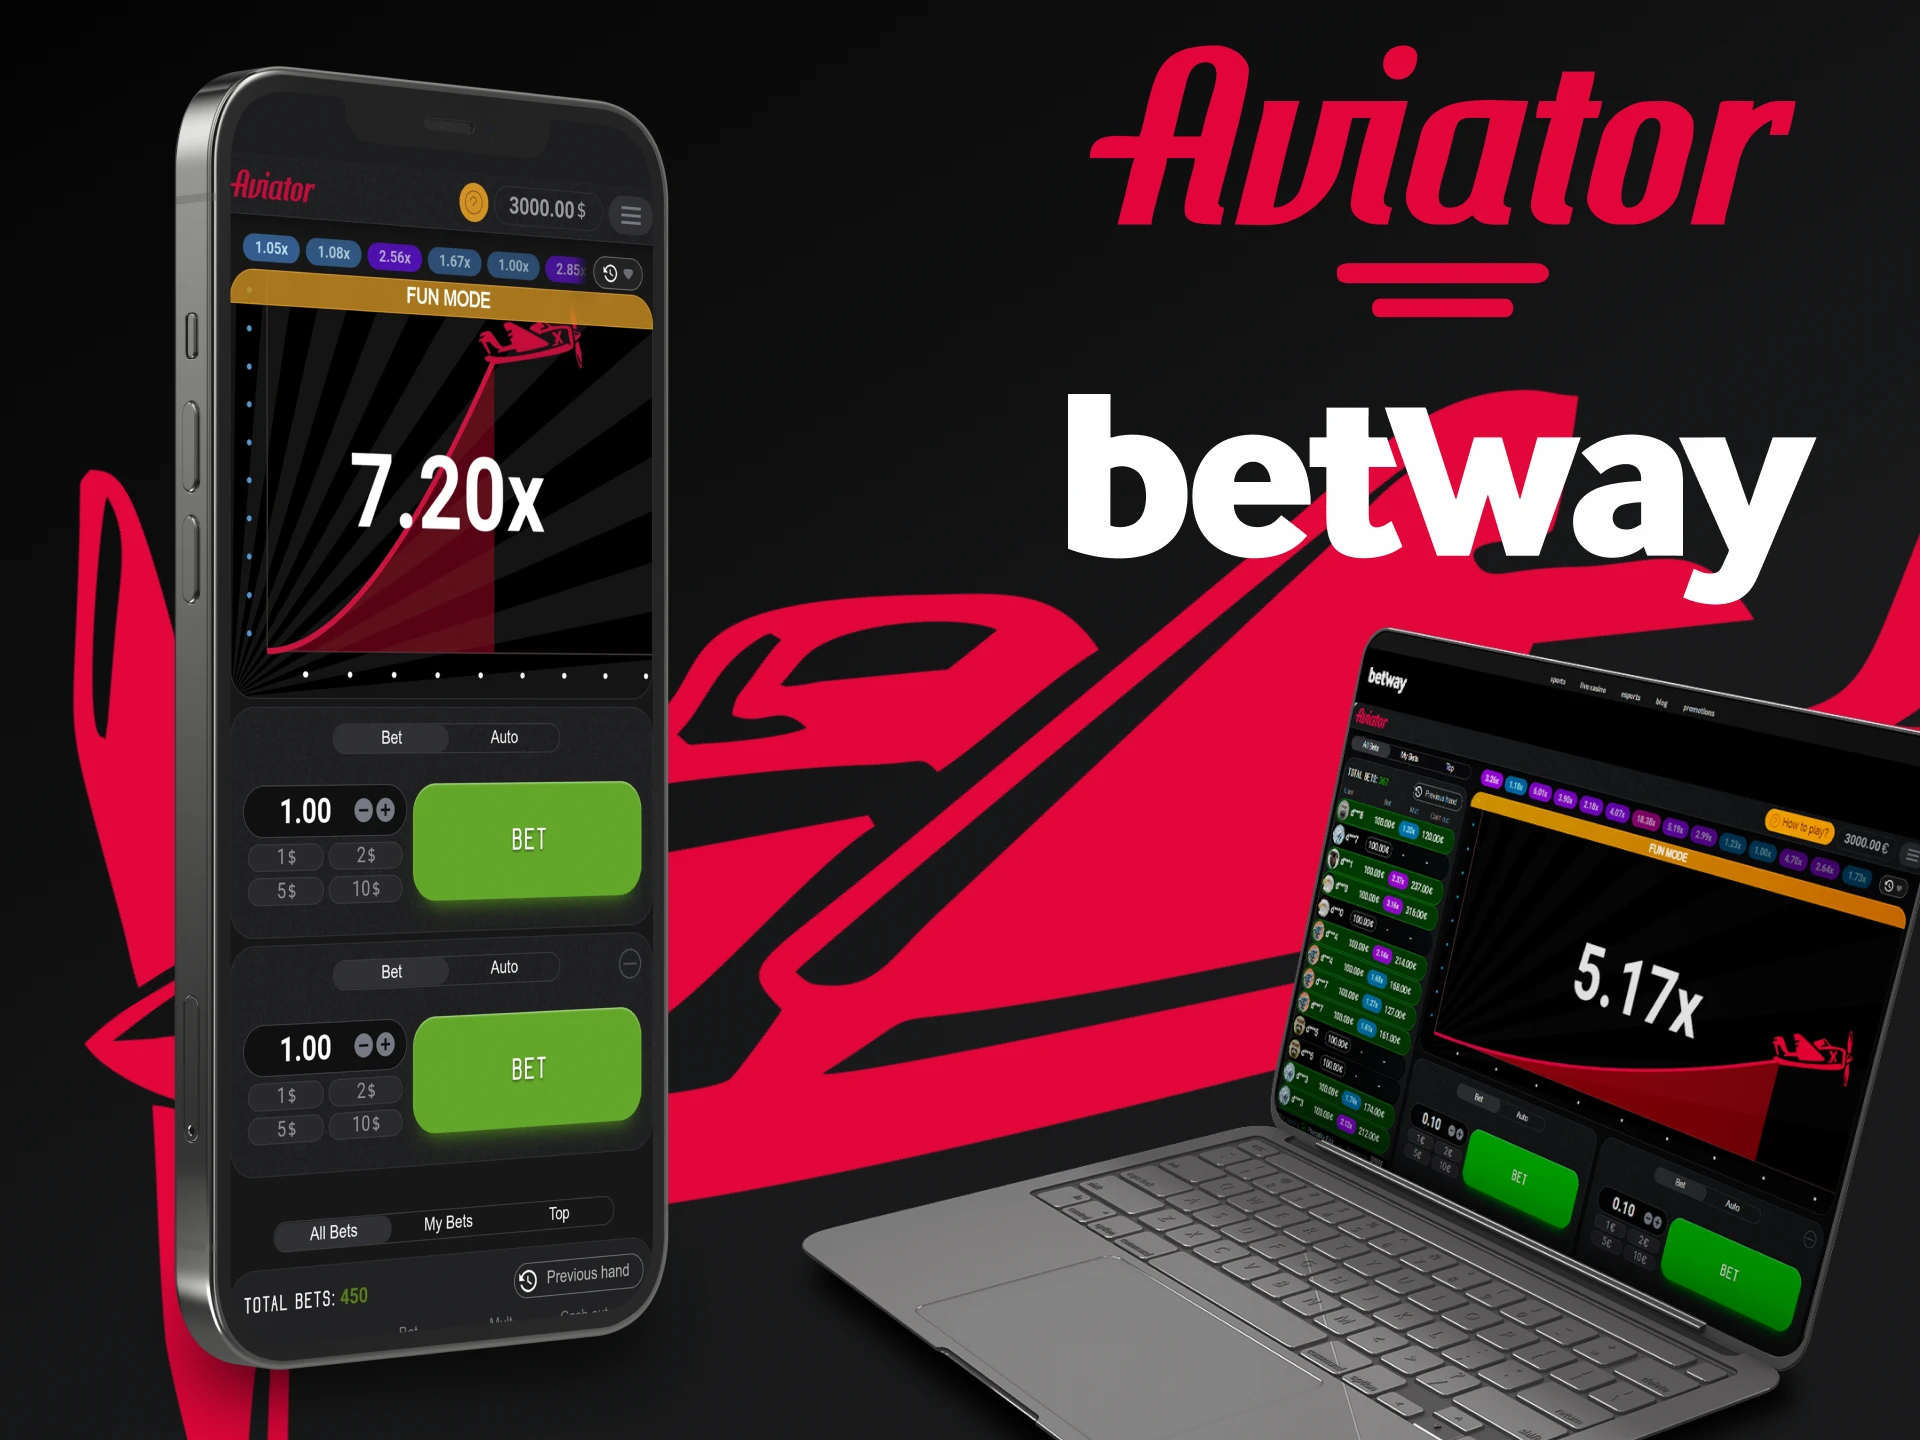 You can play Aviator both on the website and through the Betway app.